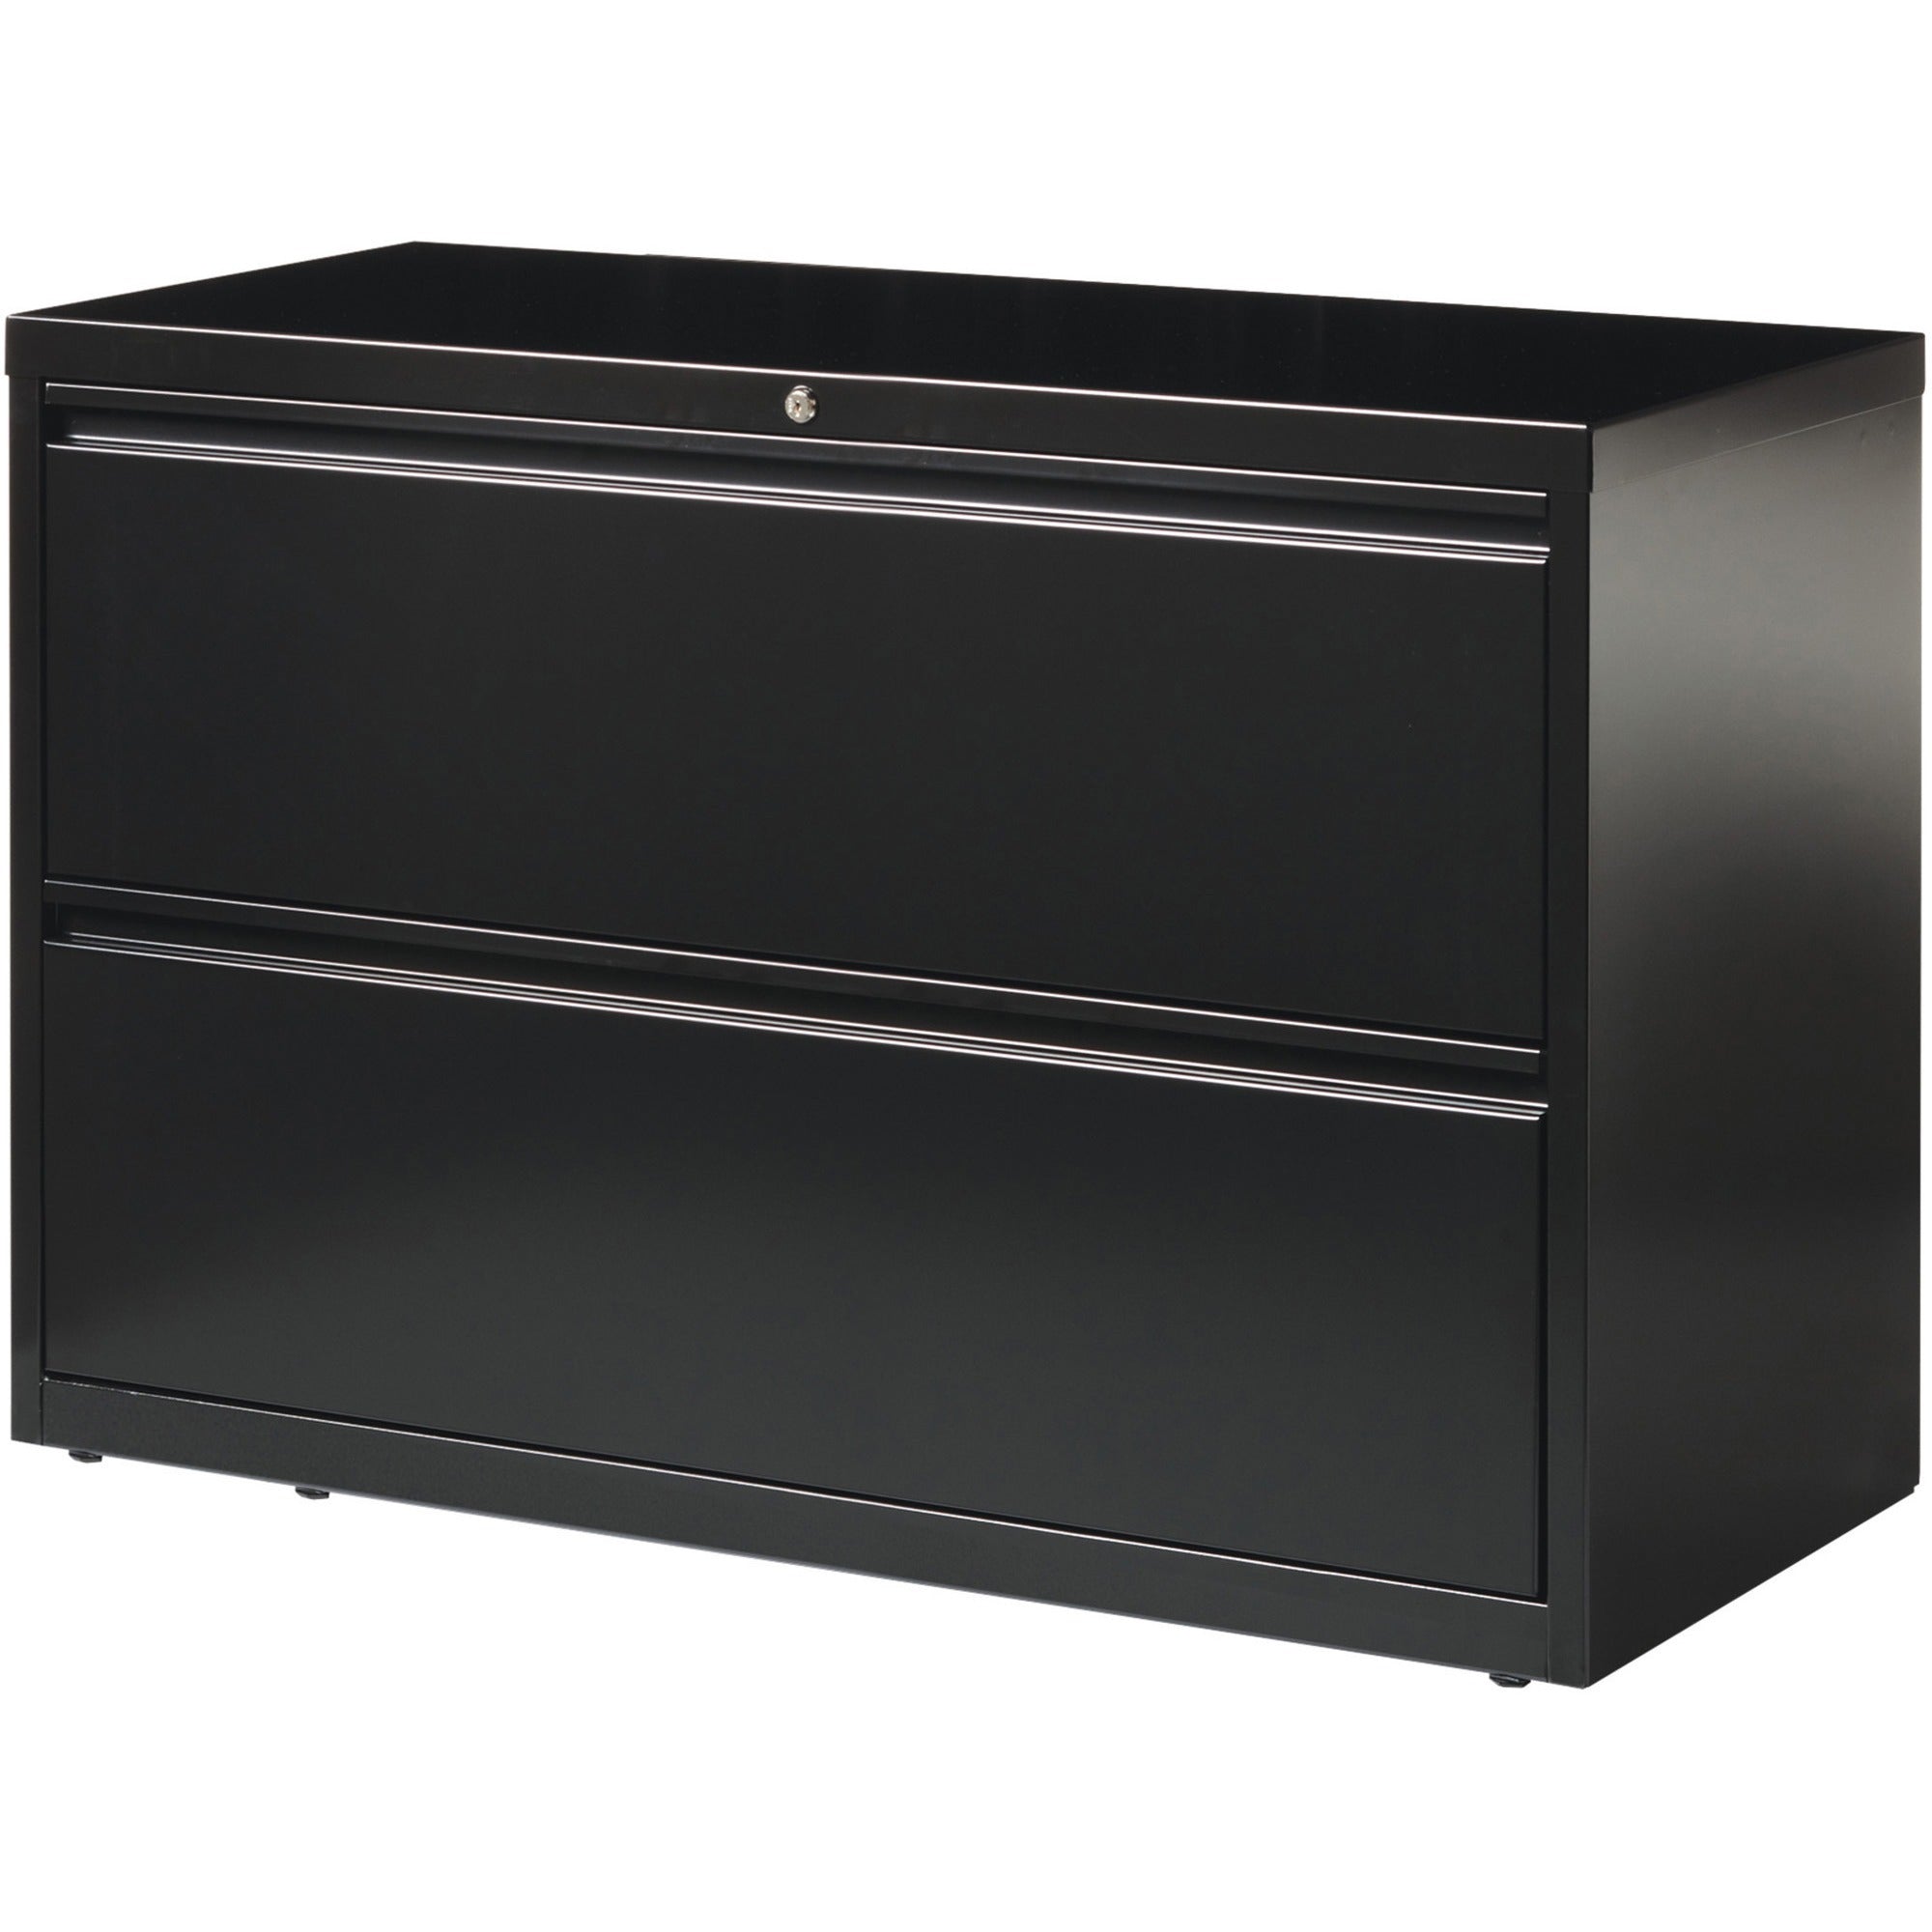 Lorell Fortress Series Lateral File - 42" x 18.6" x 28.1" - 2 x Drawer(s) for File - Letter, Legal, A4 - Lateral - Interlocking, Leveling Glide, Ball-bearing Suspension, Label Holder - Black - Recycled - 